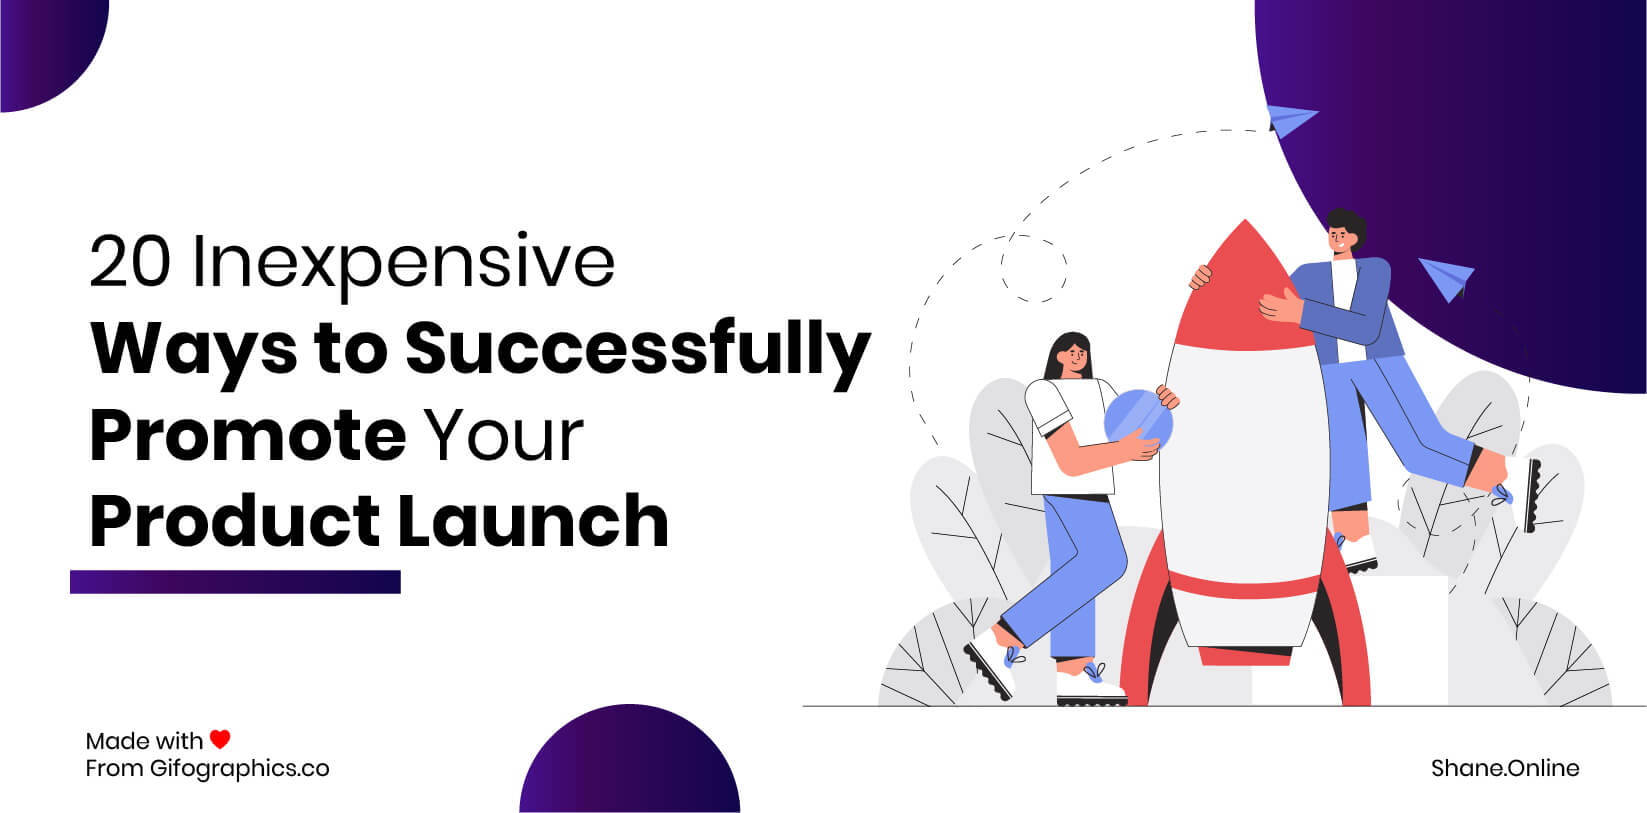 20 inexpensive ways to successfully promote your product launch